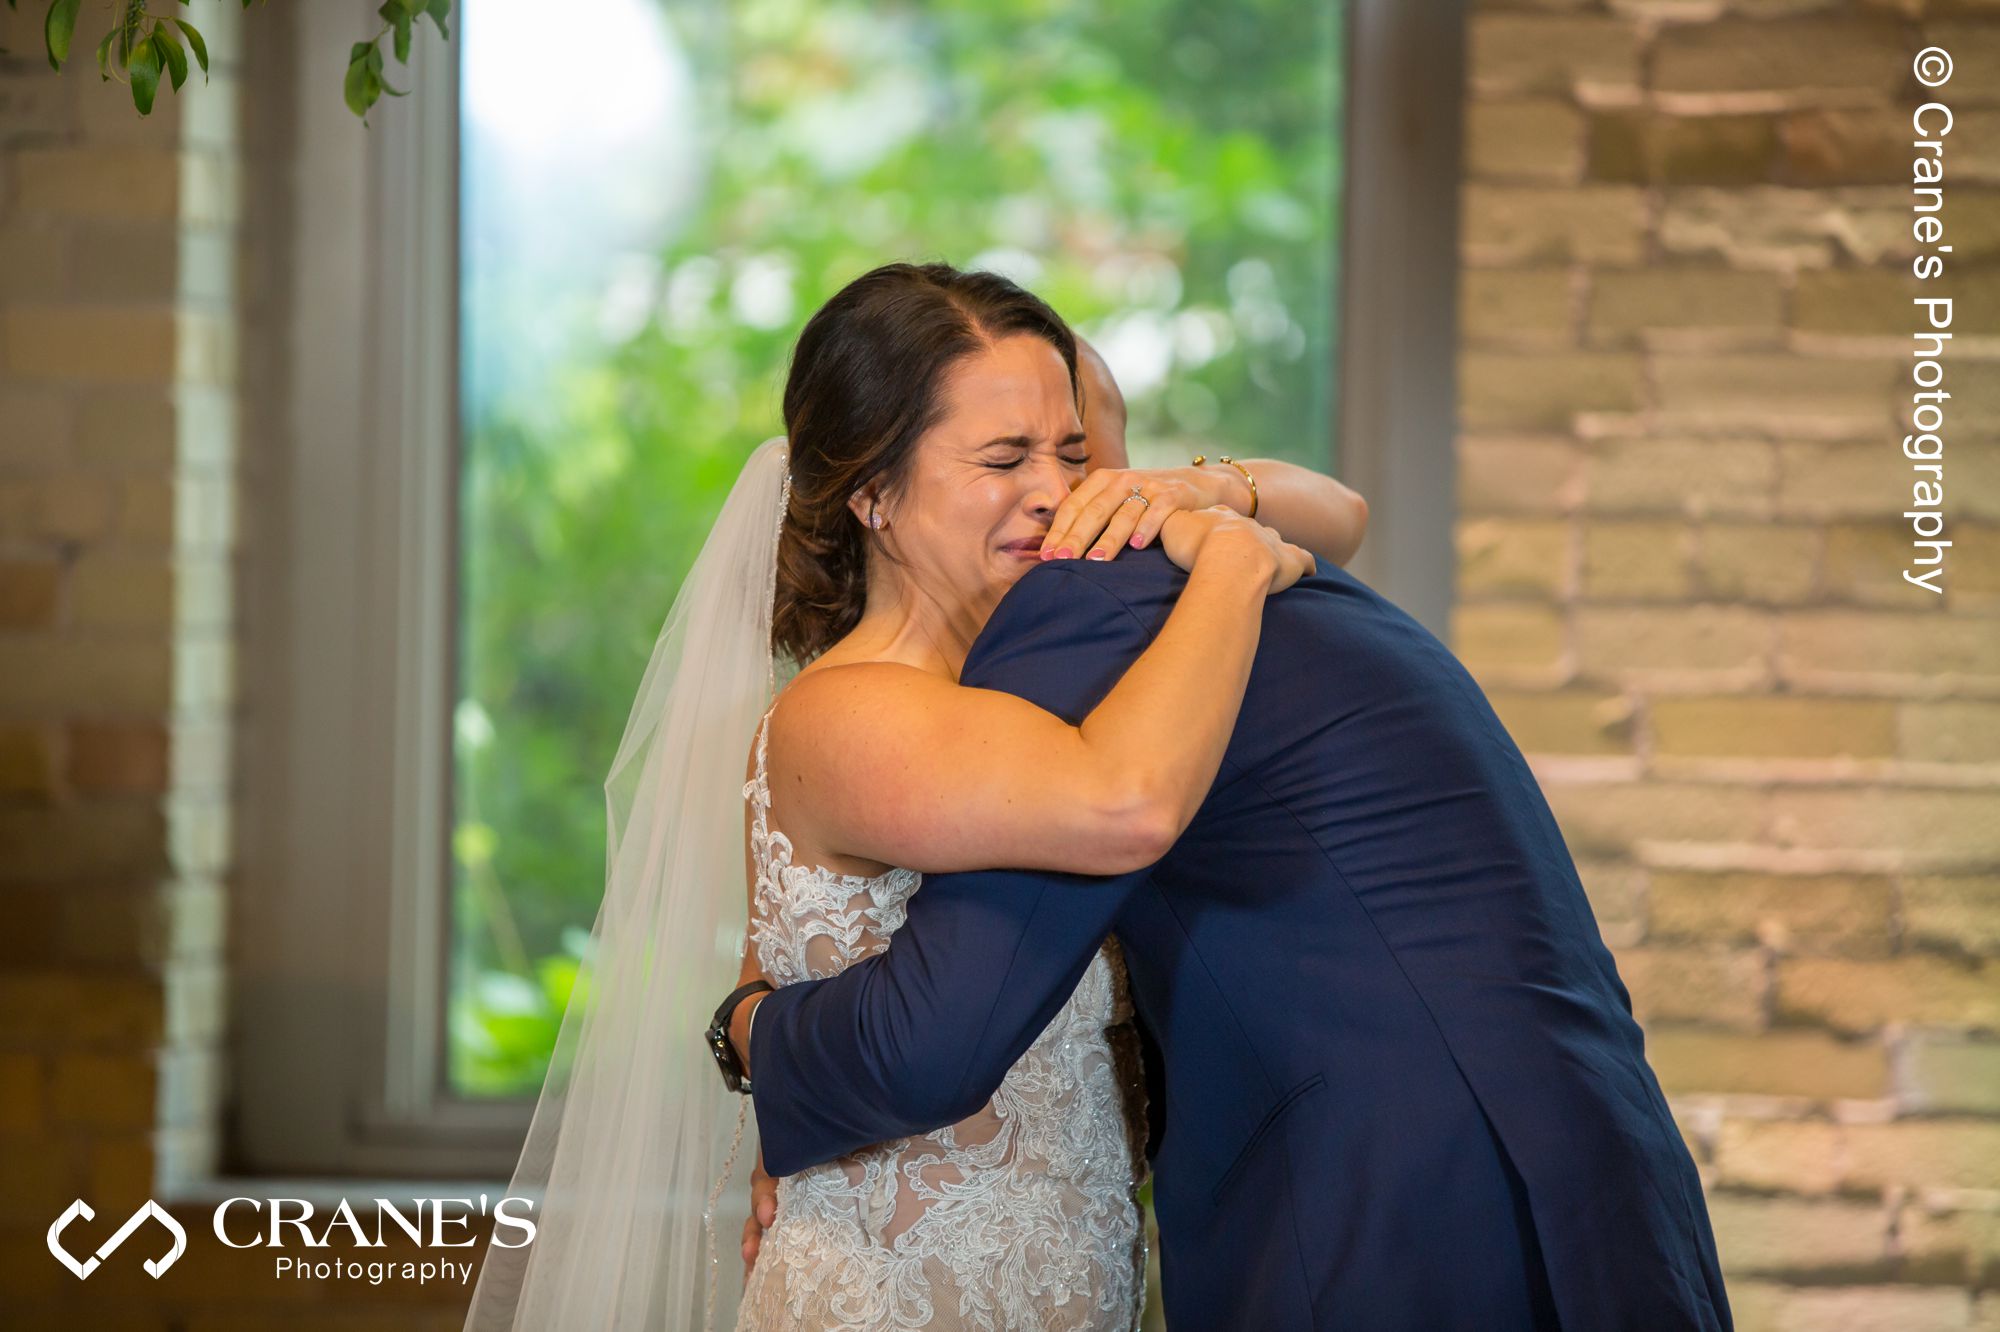 Bride gets emotional while his groom is hugging her right after the got married